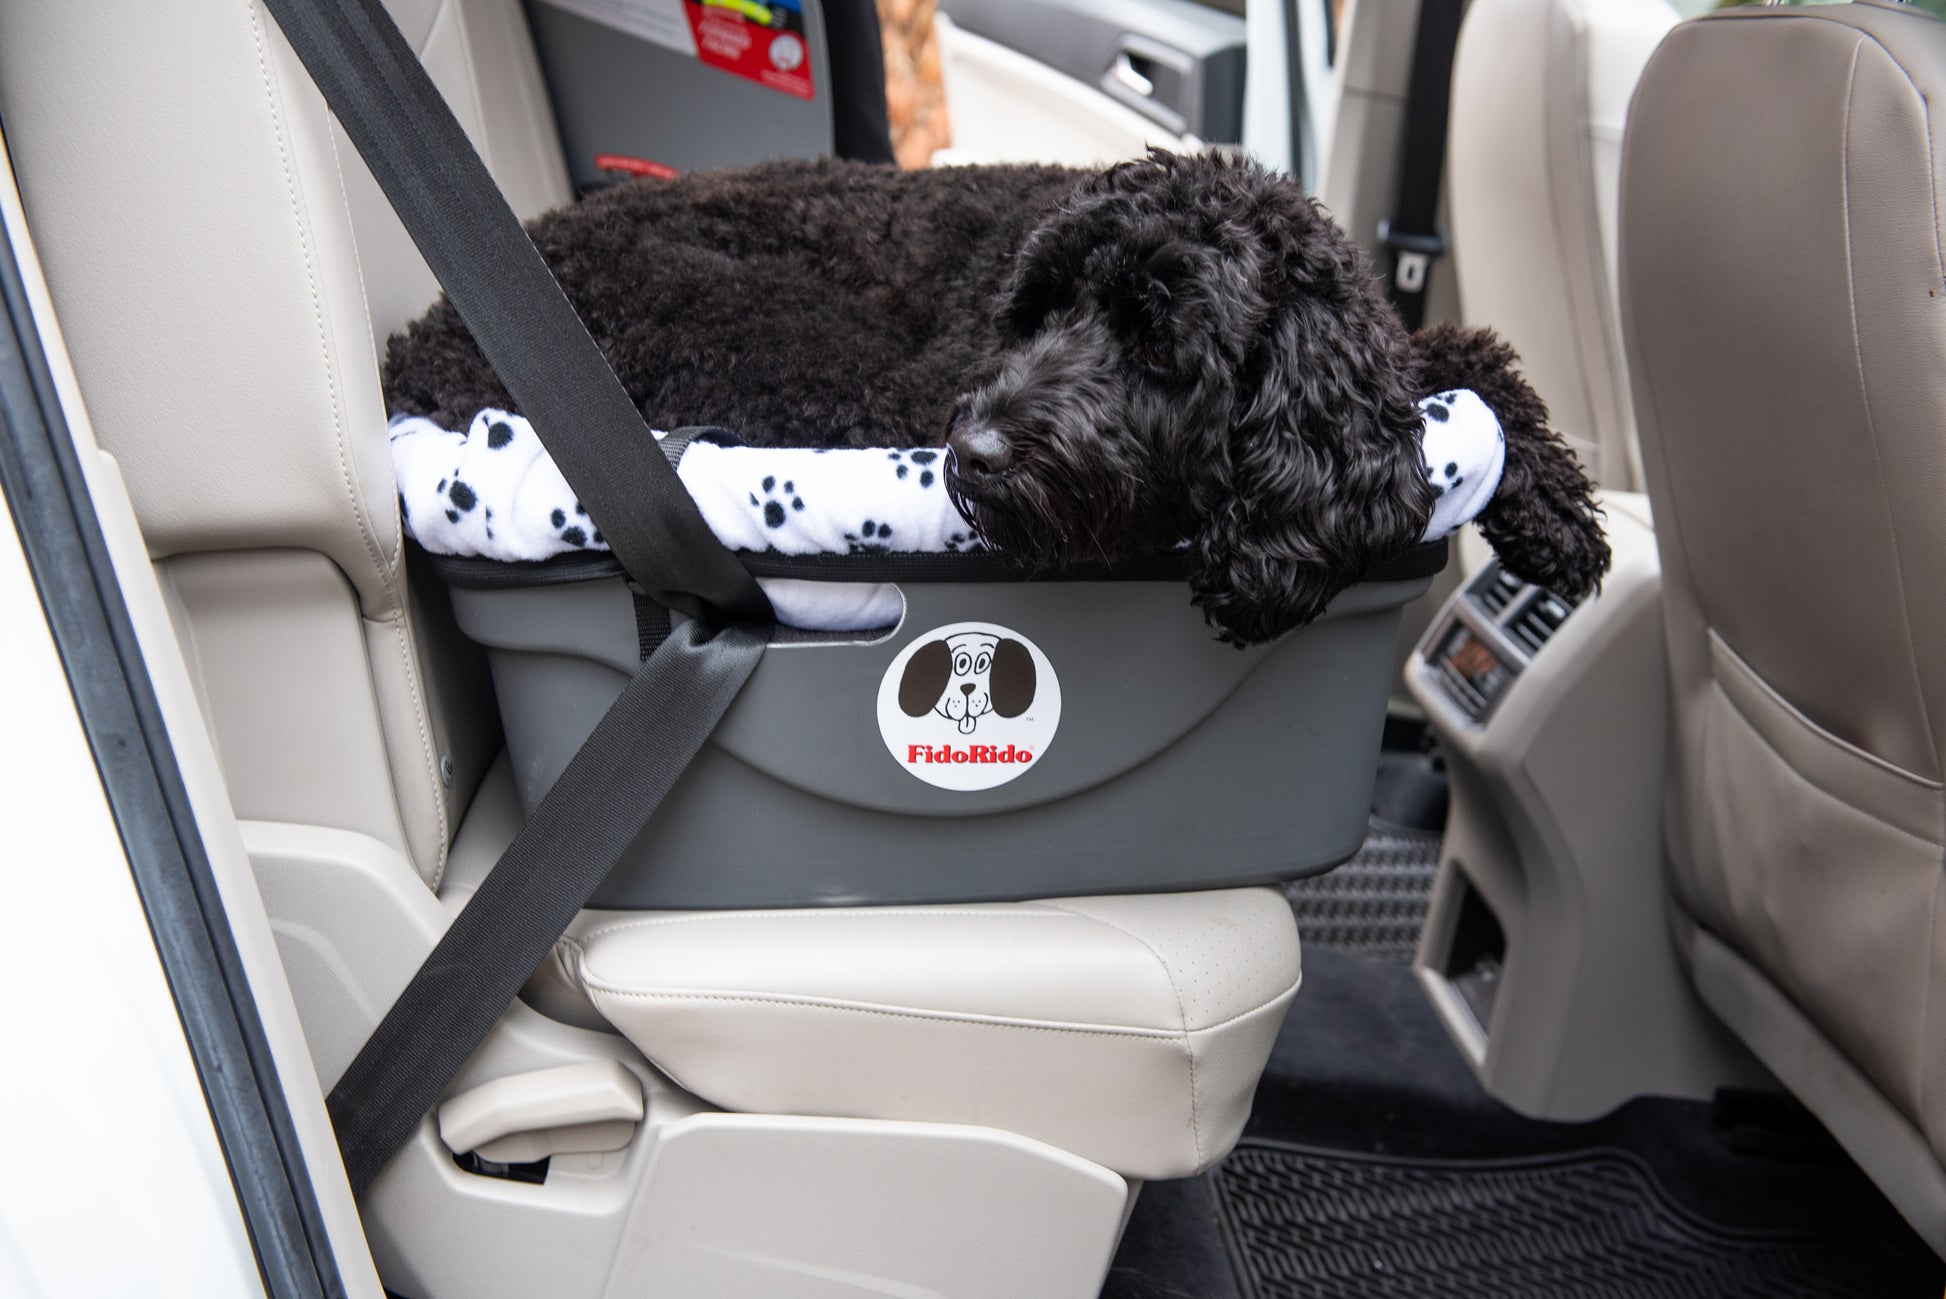 Most Comfortable Car Seat Wedge Cushion